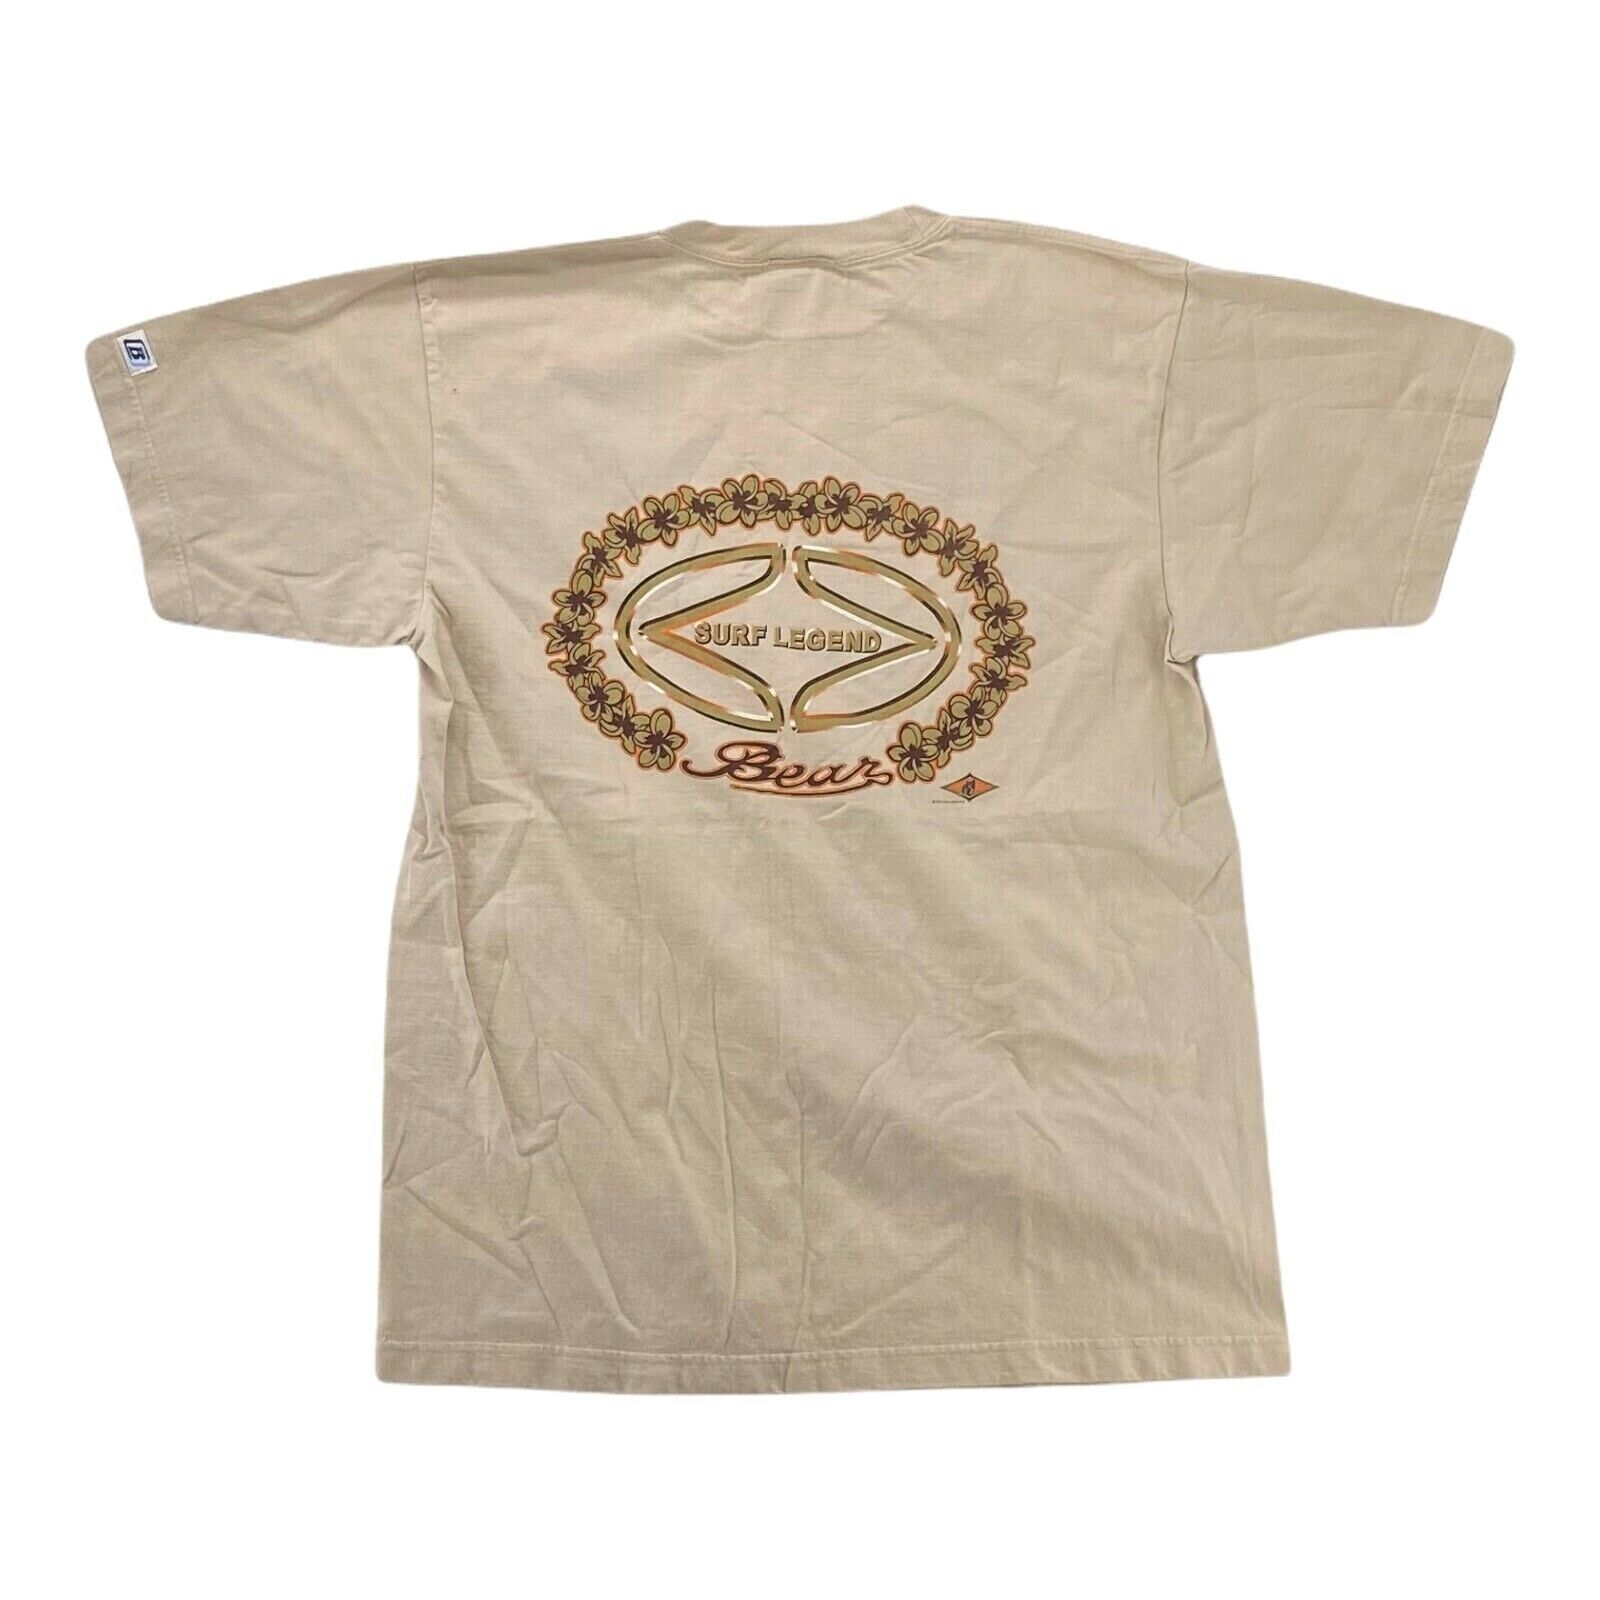 Primary image for Bear Surfboards Size Large  T-Shirt Logo 1980's Surf Wave Graphic TAN